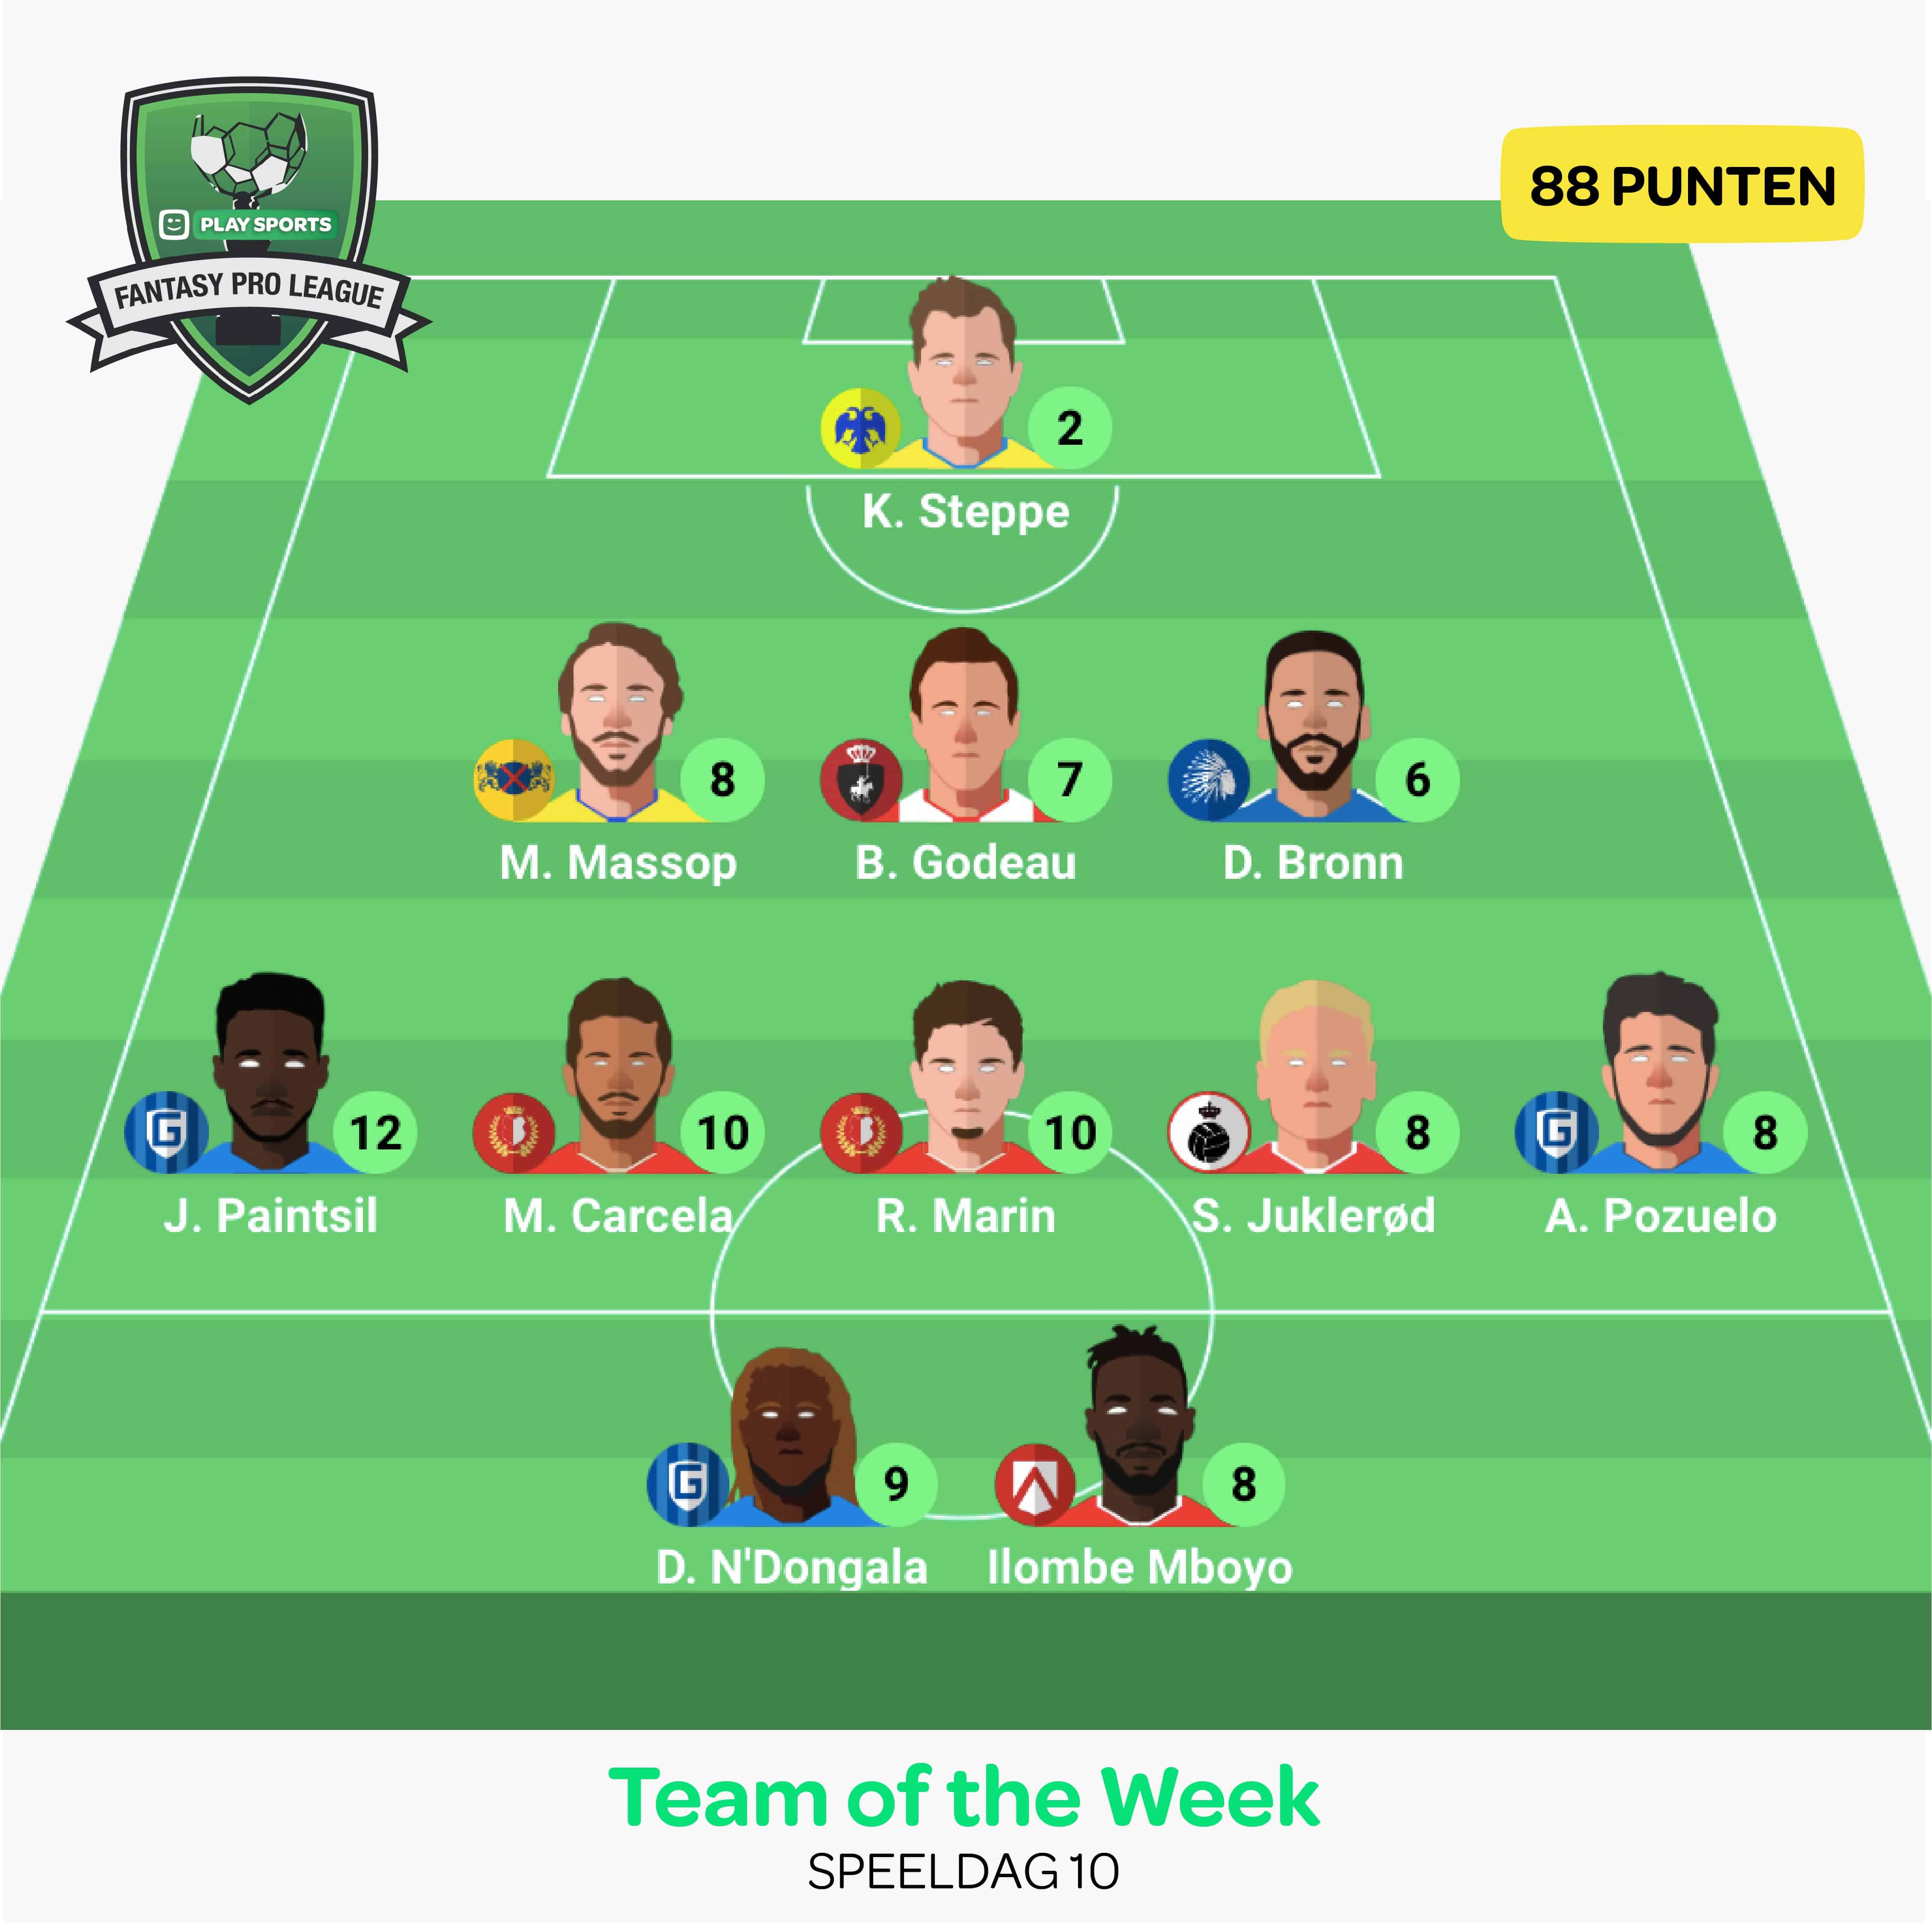 Fantasy Pro League Team of the Week